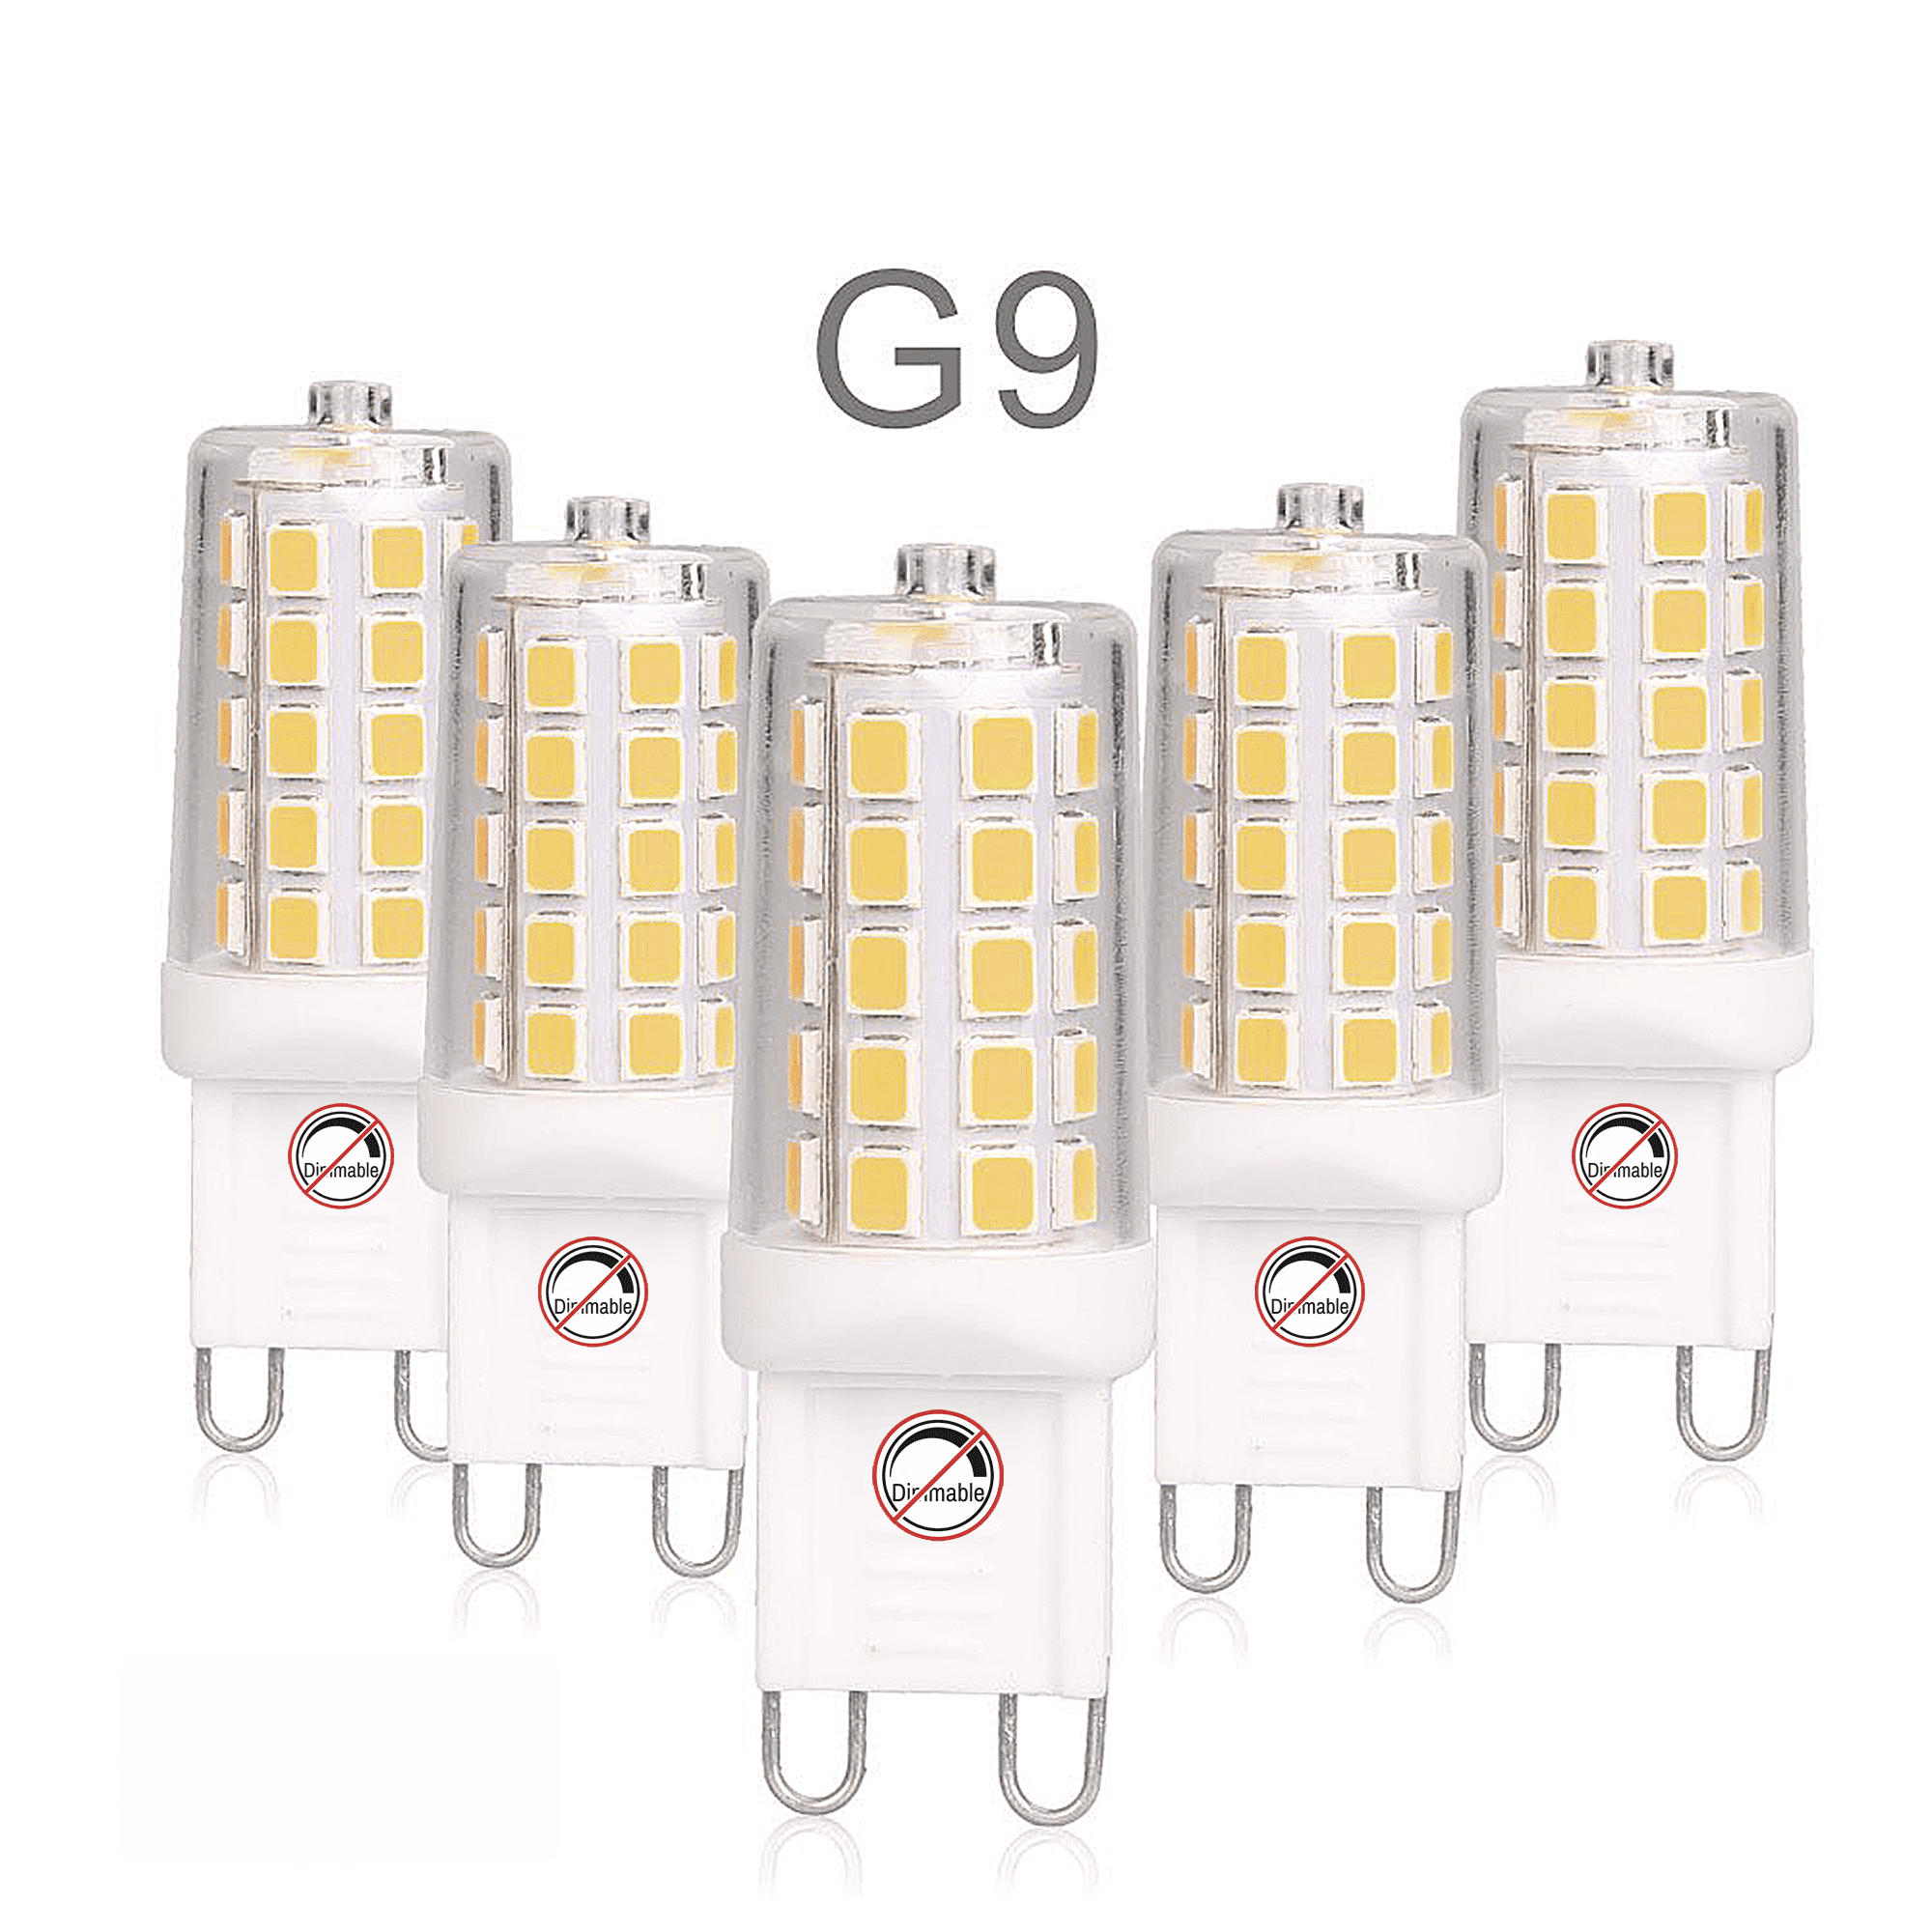 BAOMING G9 LED Bulbs Light 4W Non-Dimmable 2700K Soft Warm Equivalent Halogen 40W 5 Pack -